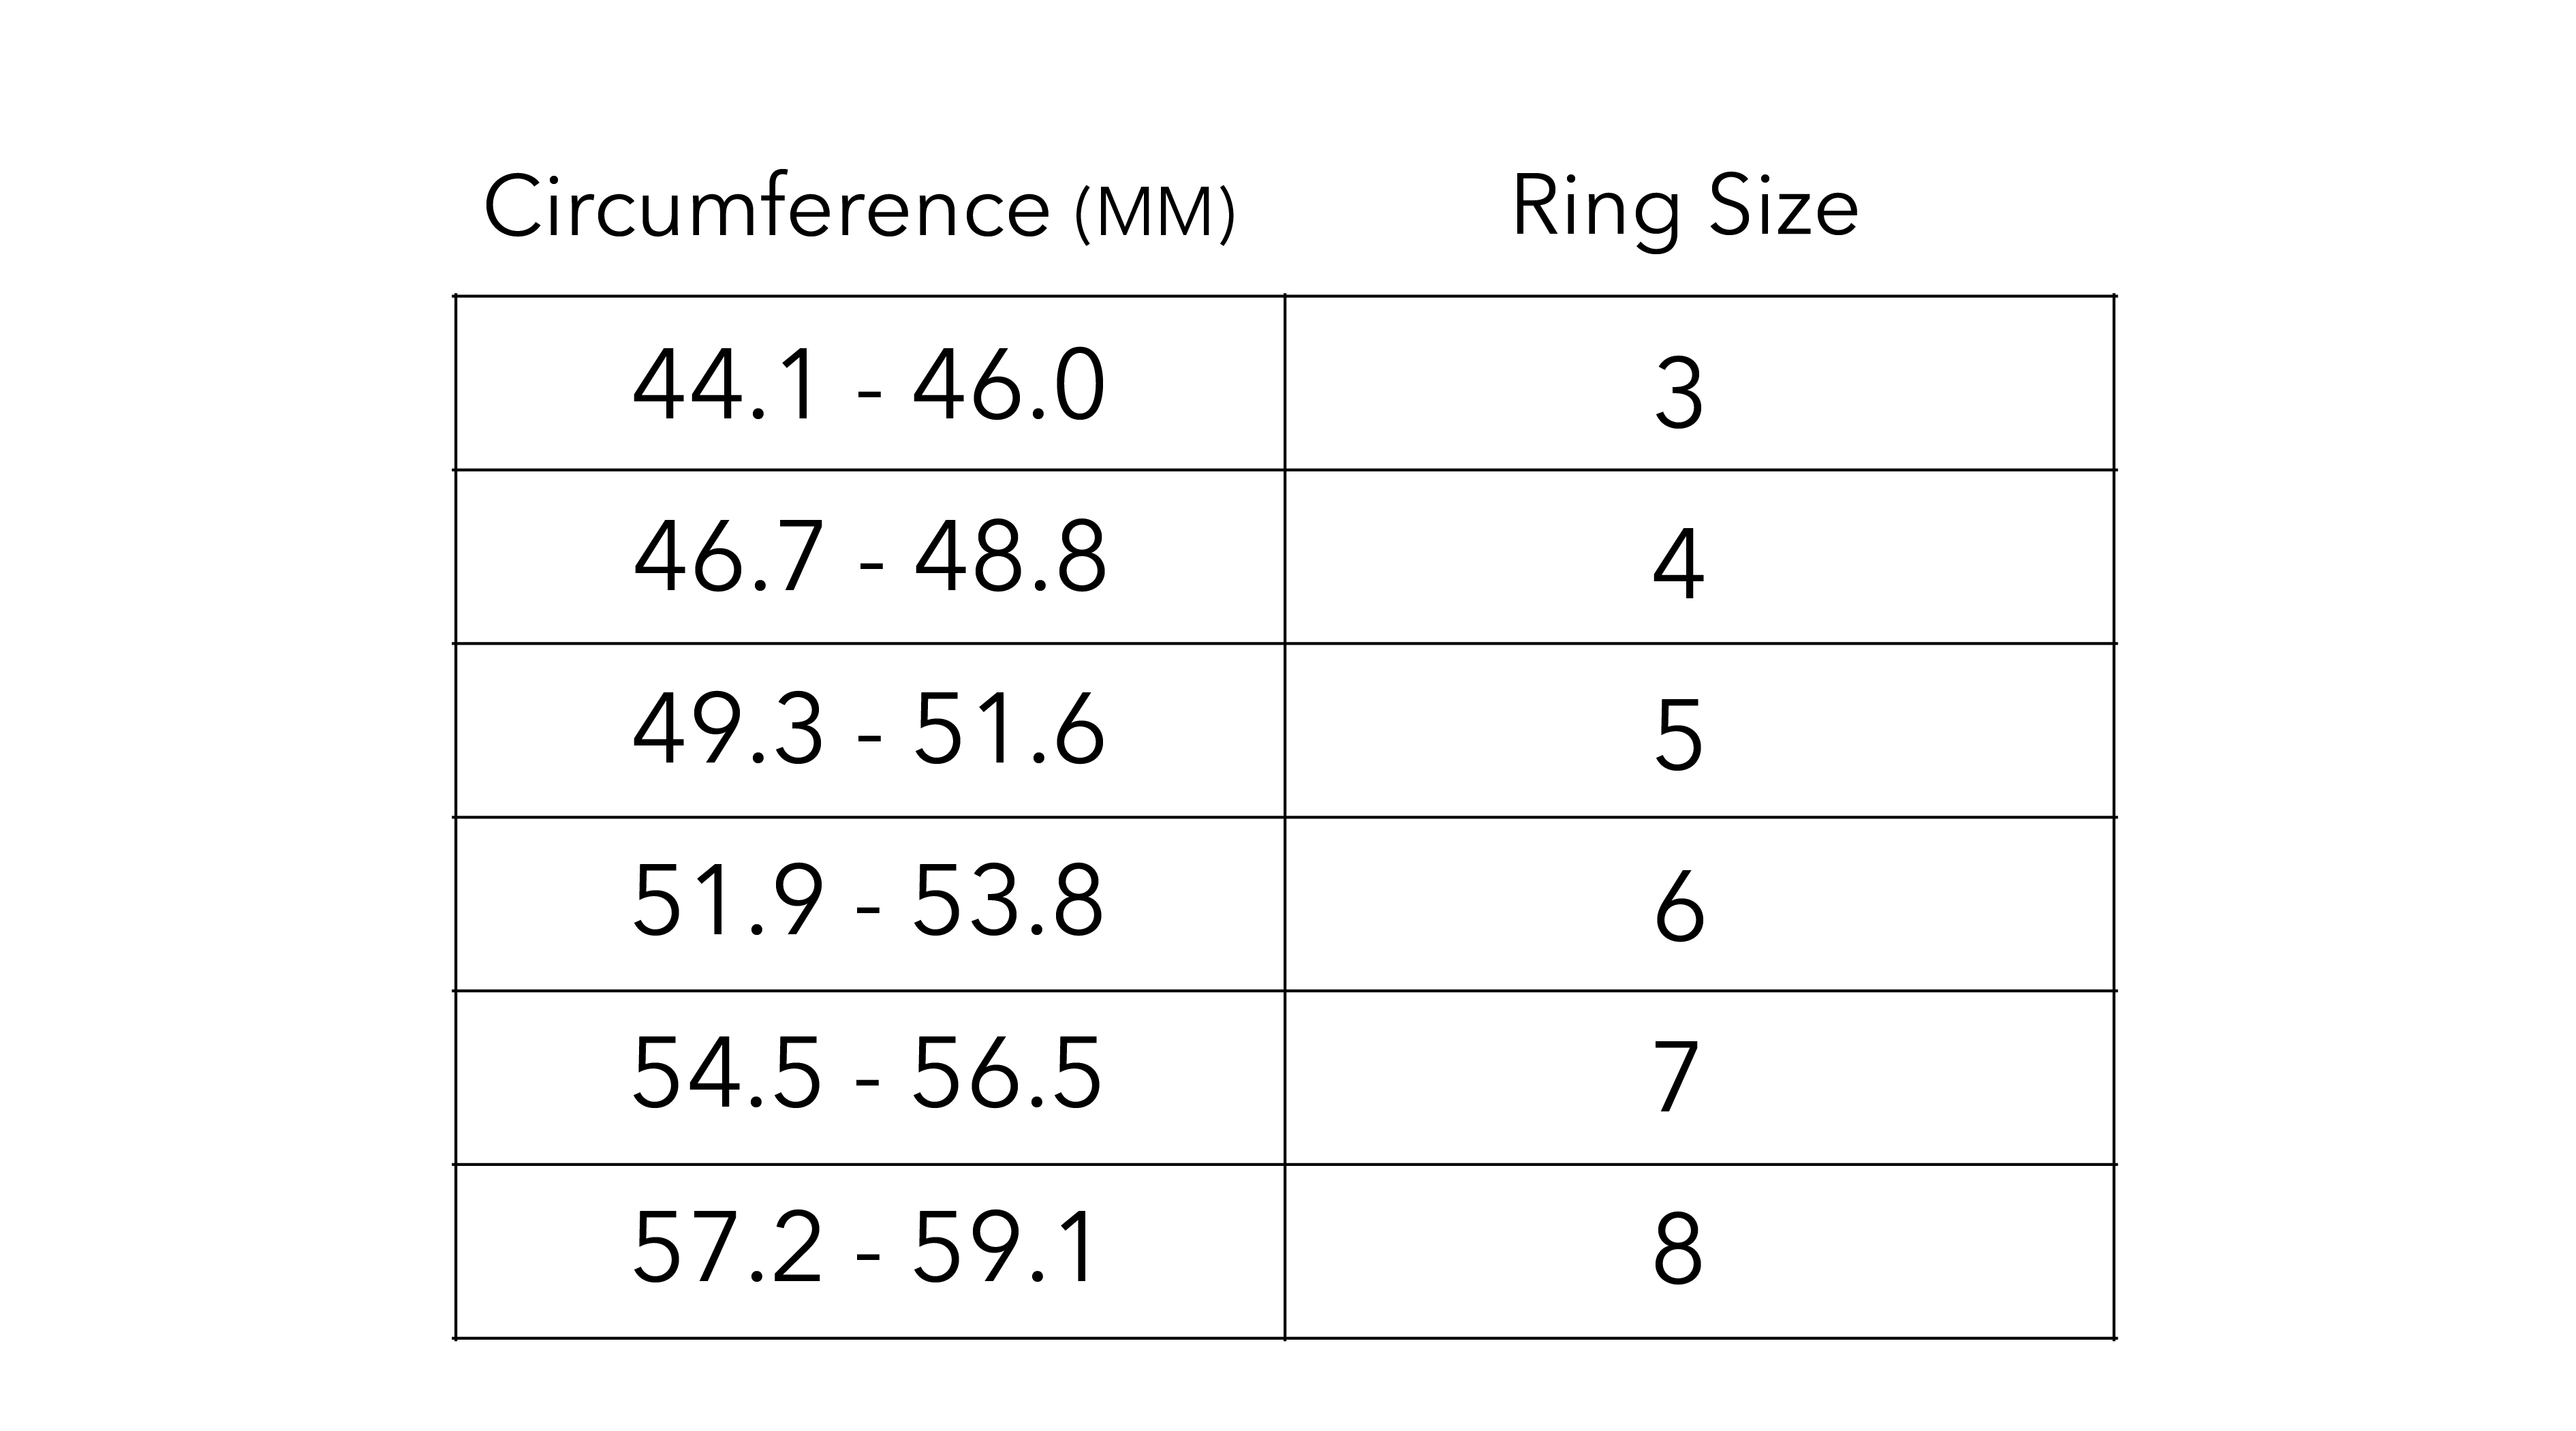 Moyoura Ring Size Circumference Guide